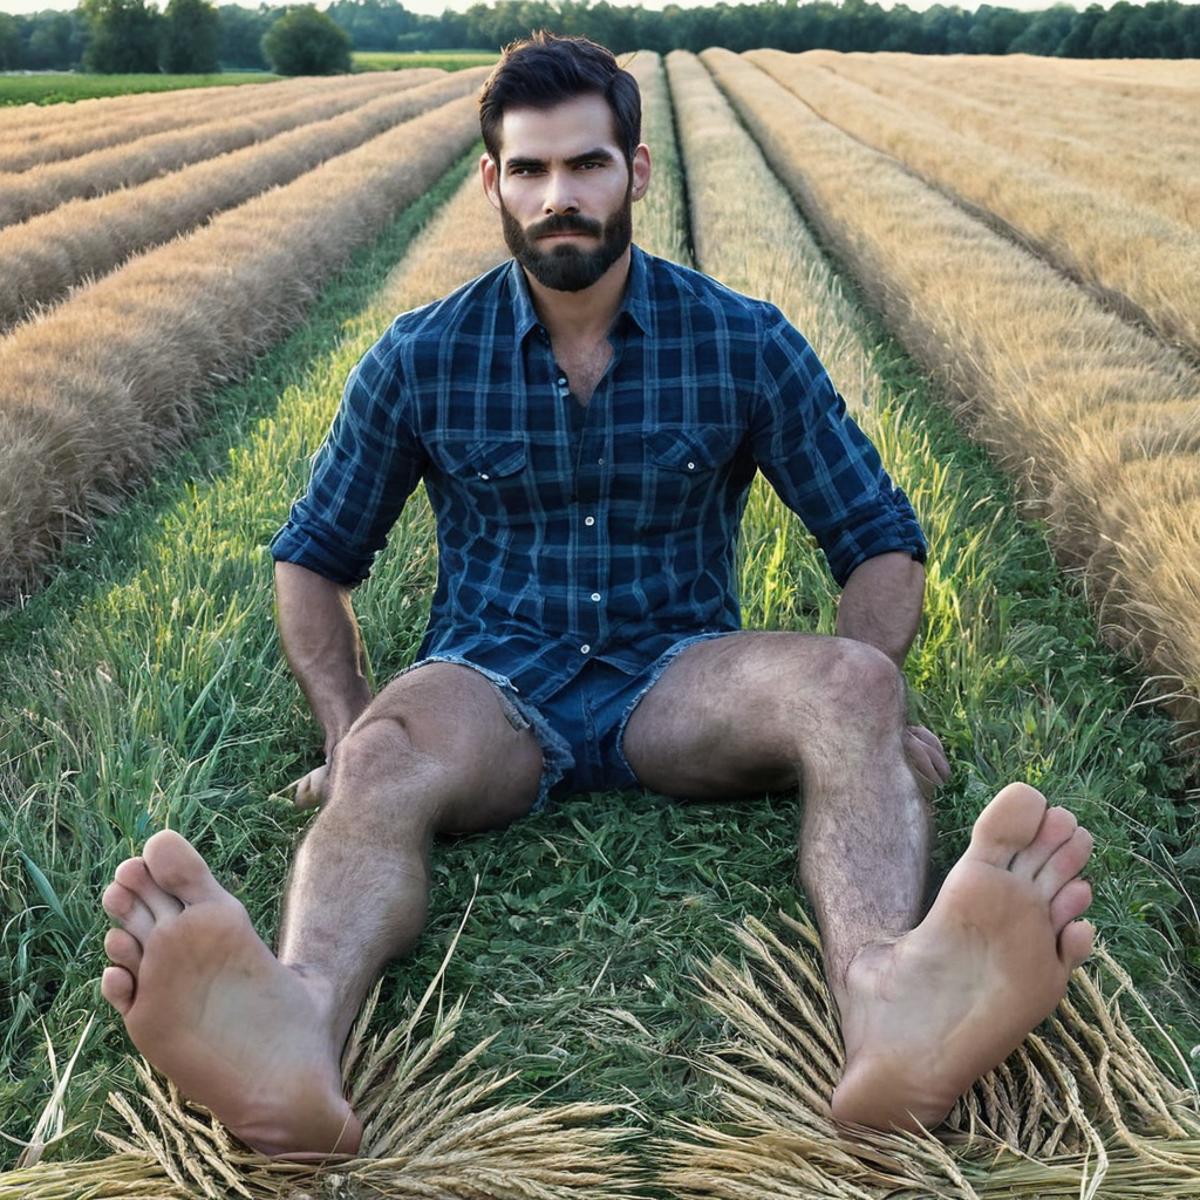 Male feet pose / barefoot image by Migg0